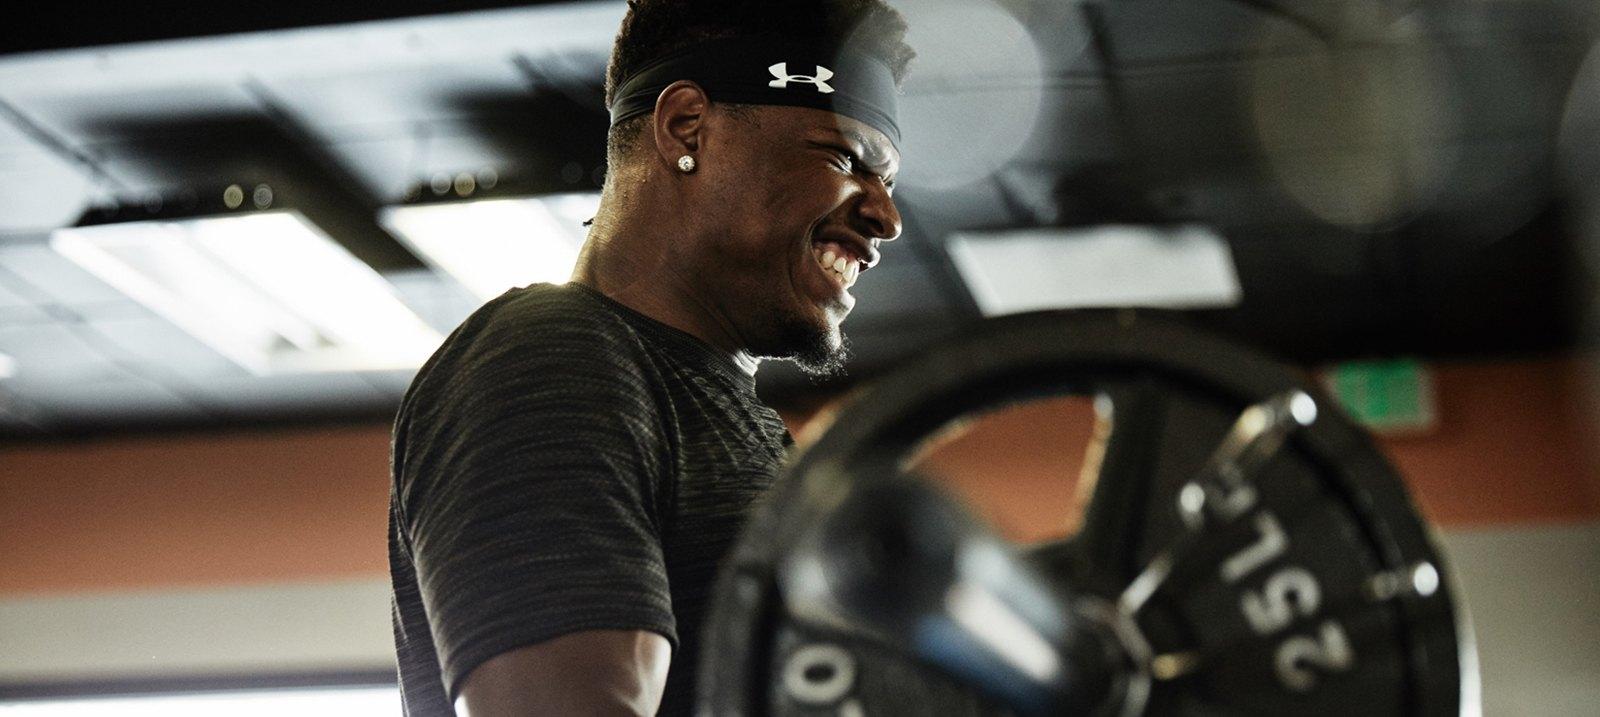 Under Armour: Men's Training and Apparel